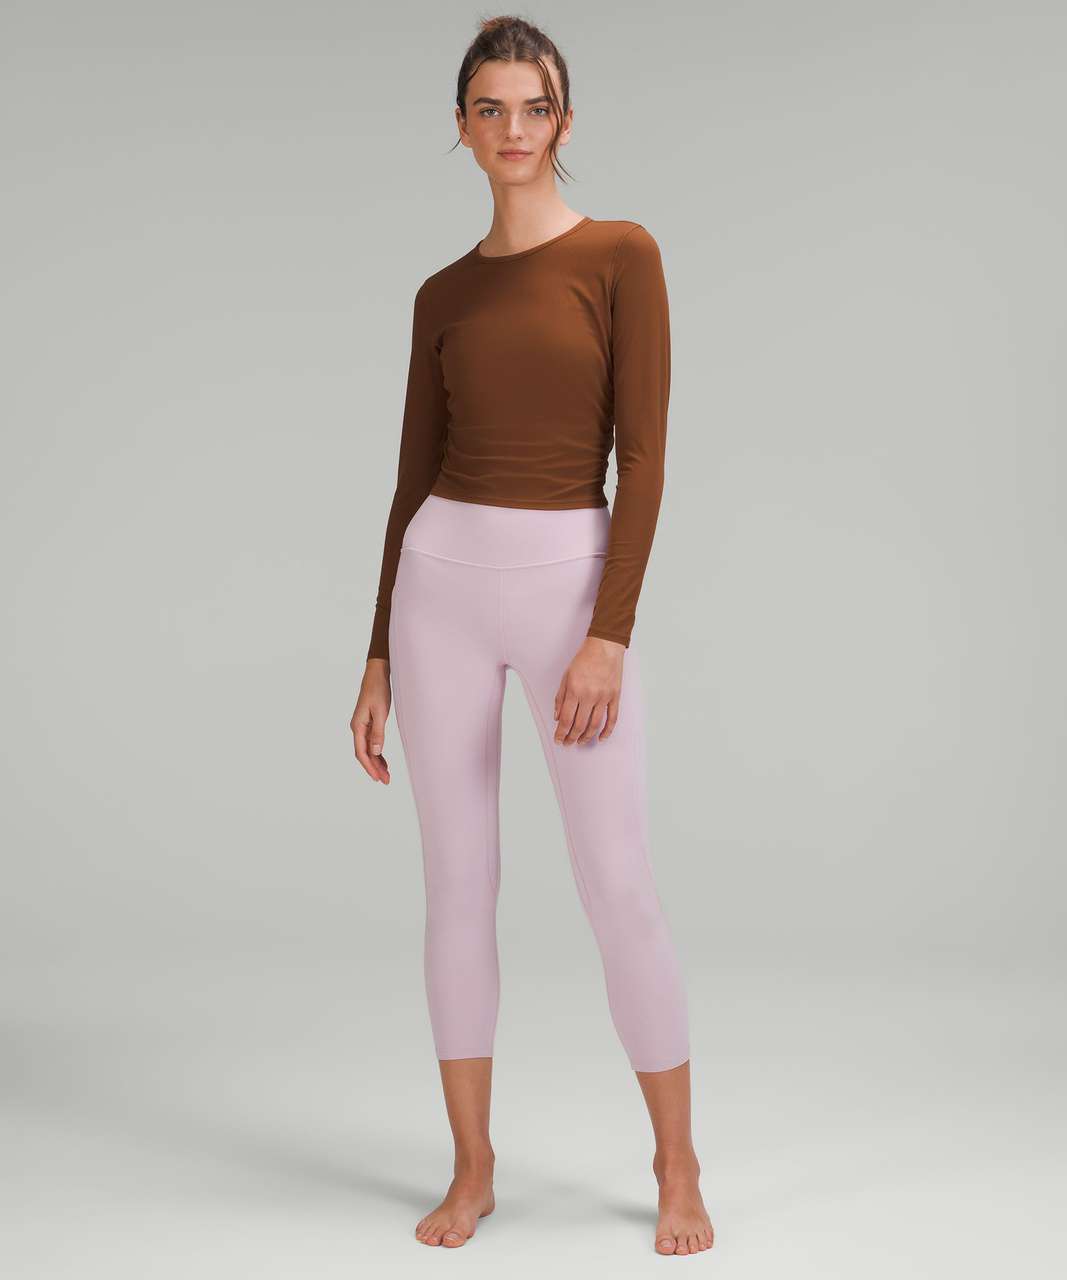 Lululemon Align High-Rise Crop 17 Pink Lychee Size 6 - $66 - From Lizanne